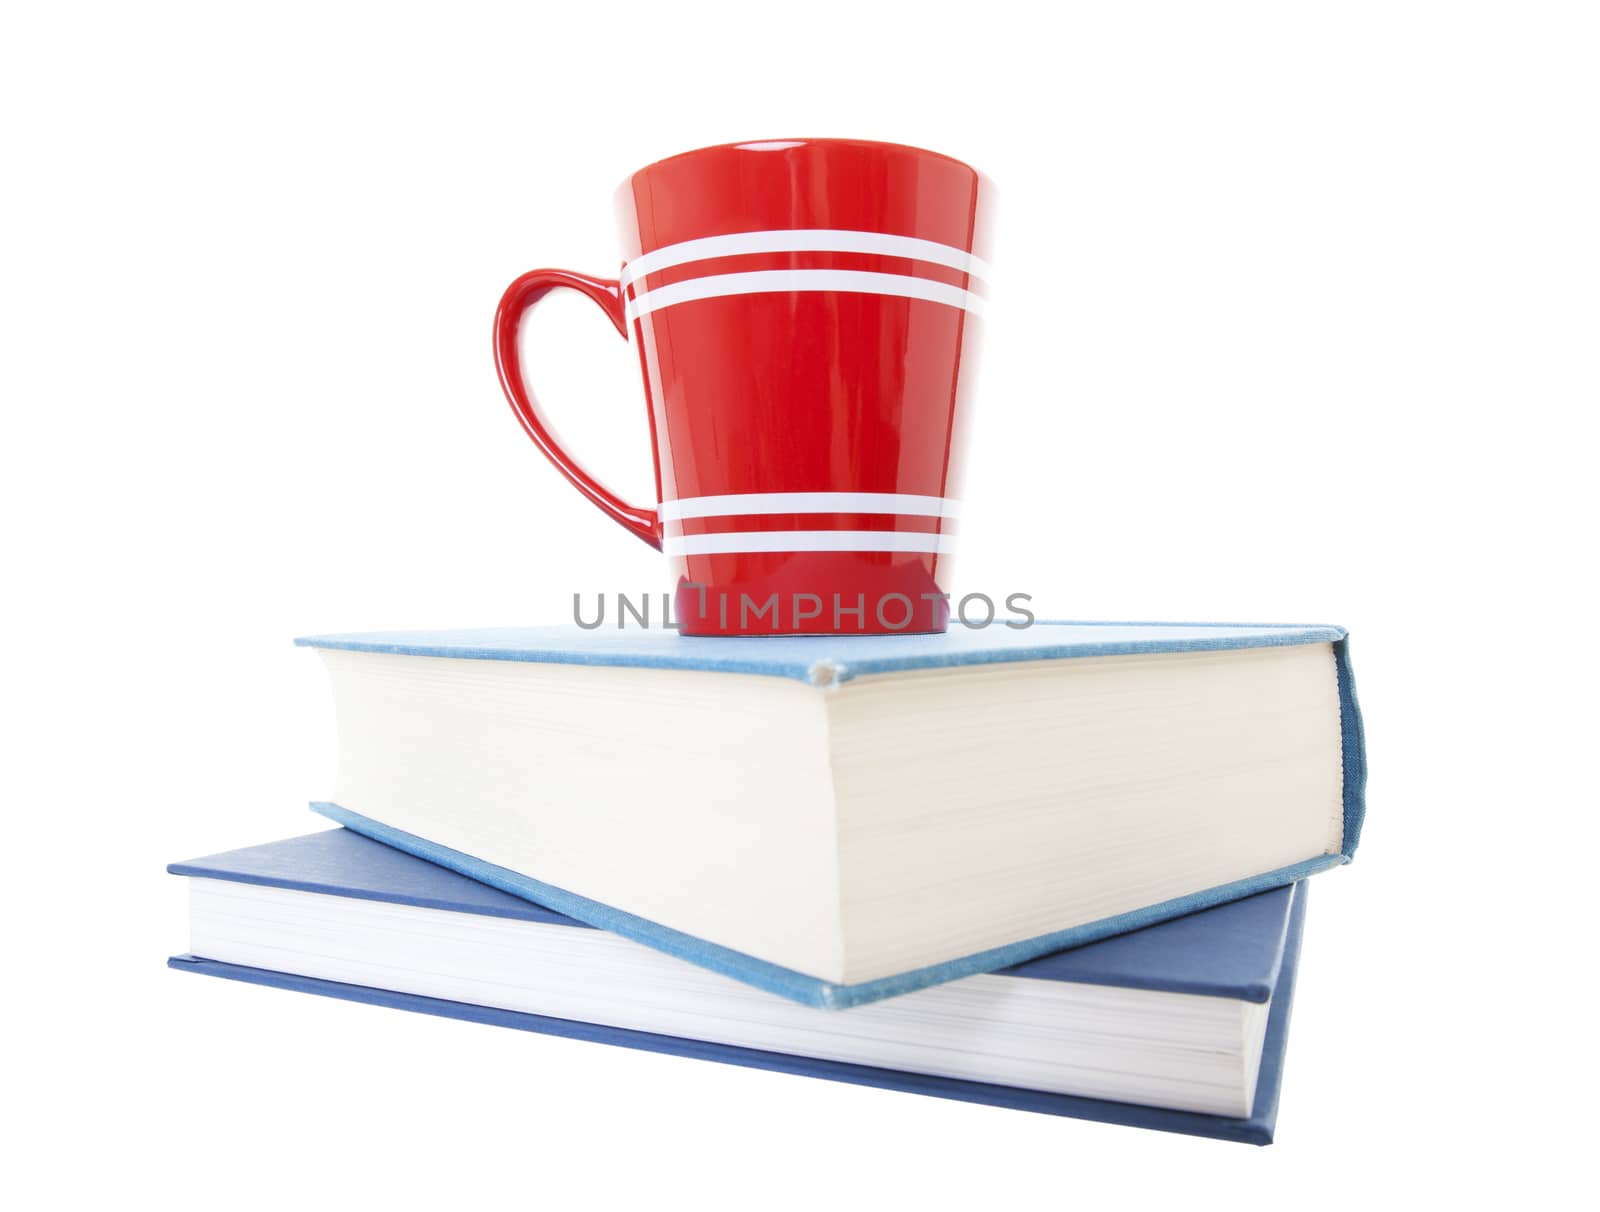 Everything needed for study time.  Textbooks and a cup of coffee on white background.  wide angle view.